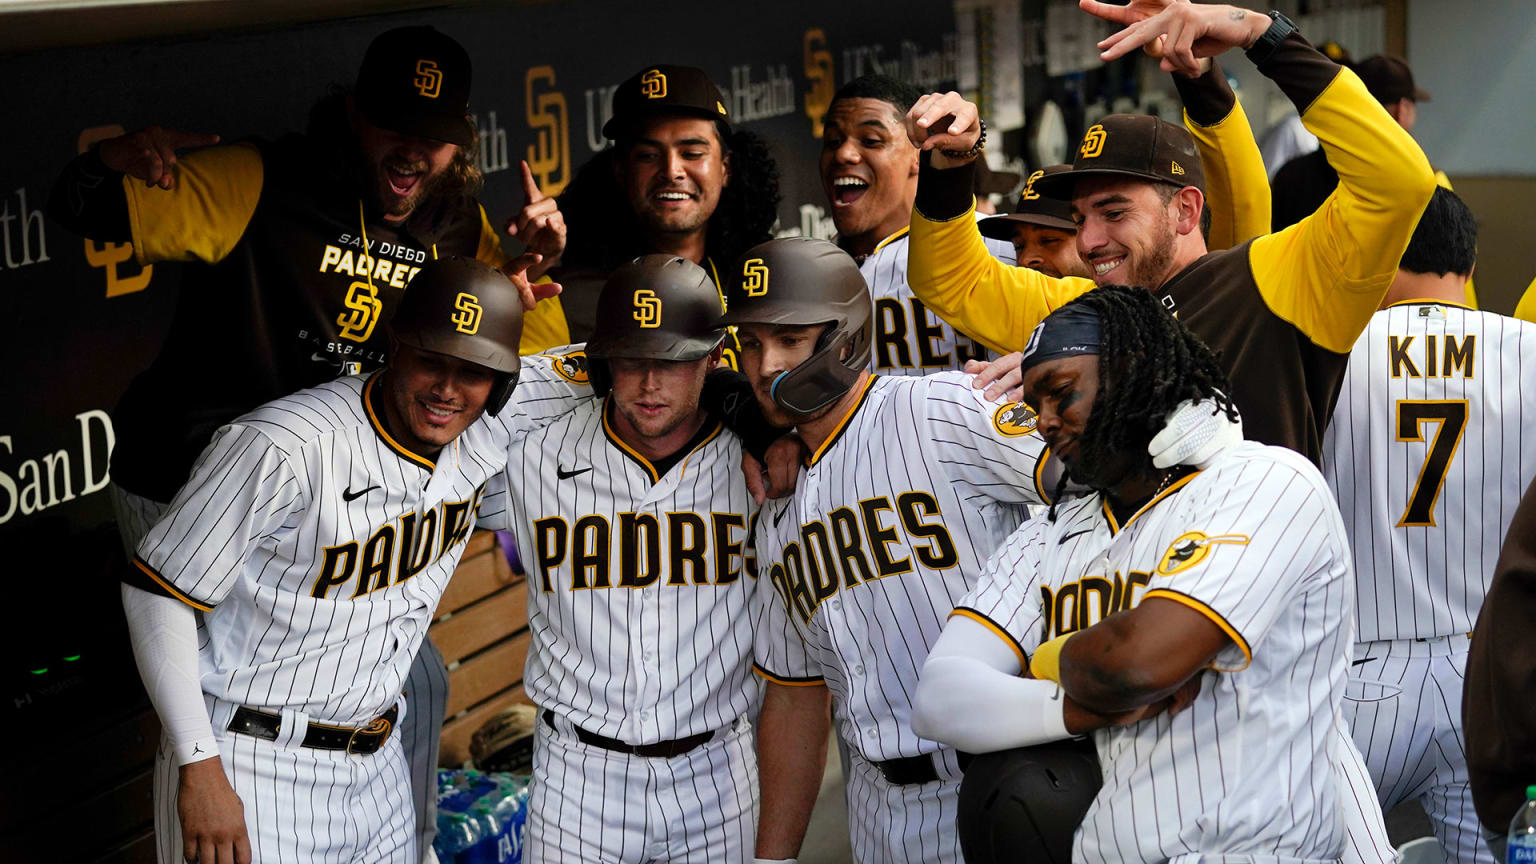 Eight Padres players gather in the dugout pretending to pose for a photograph